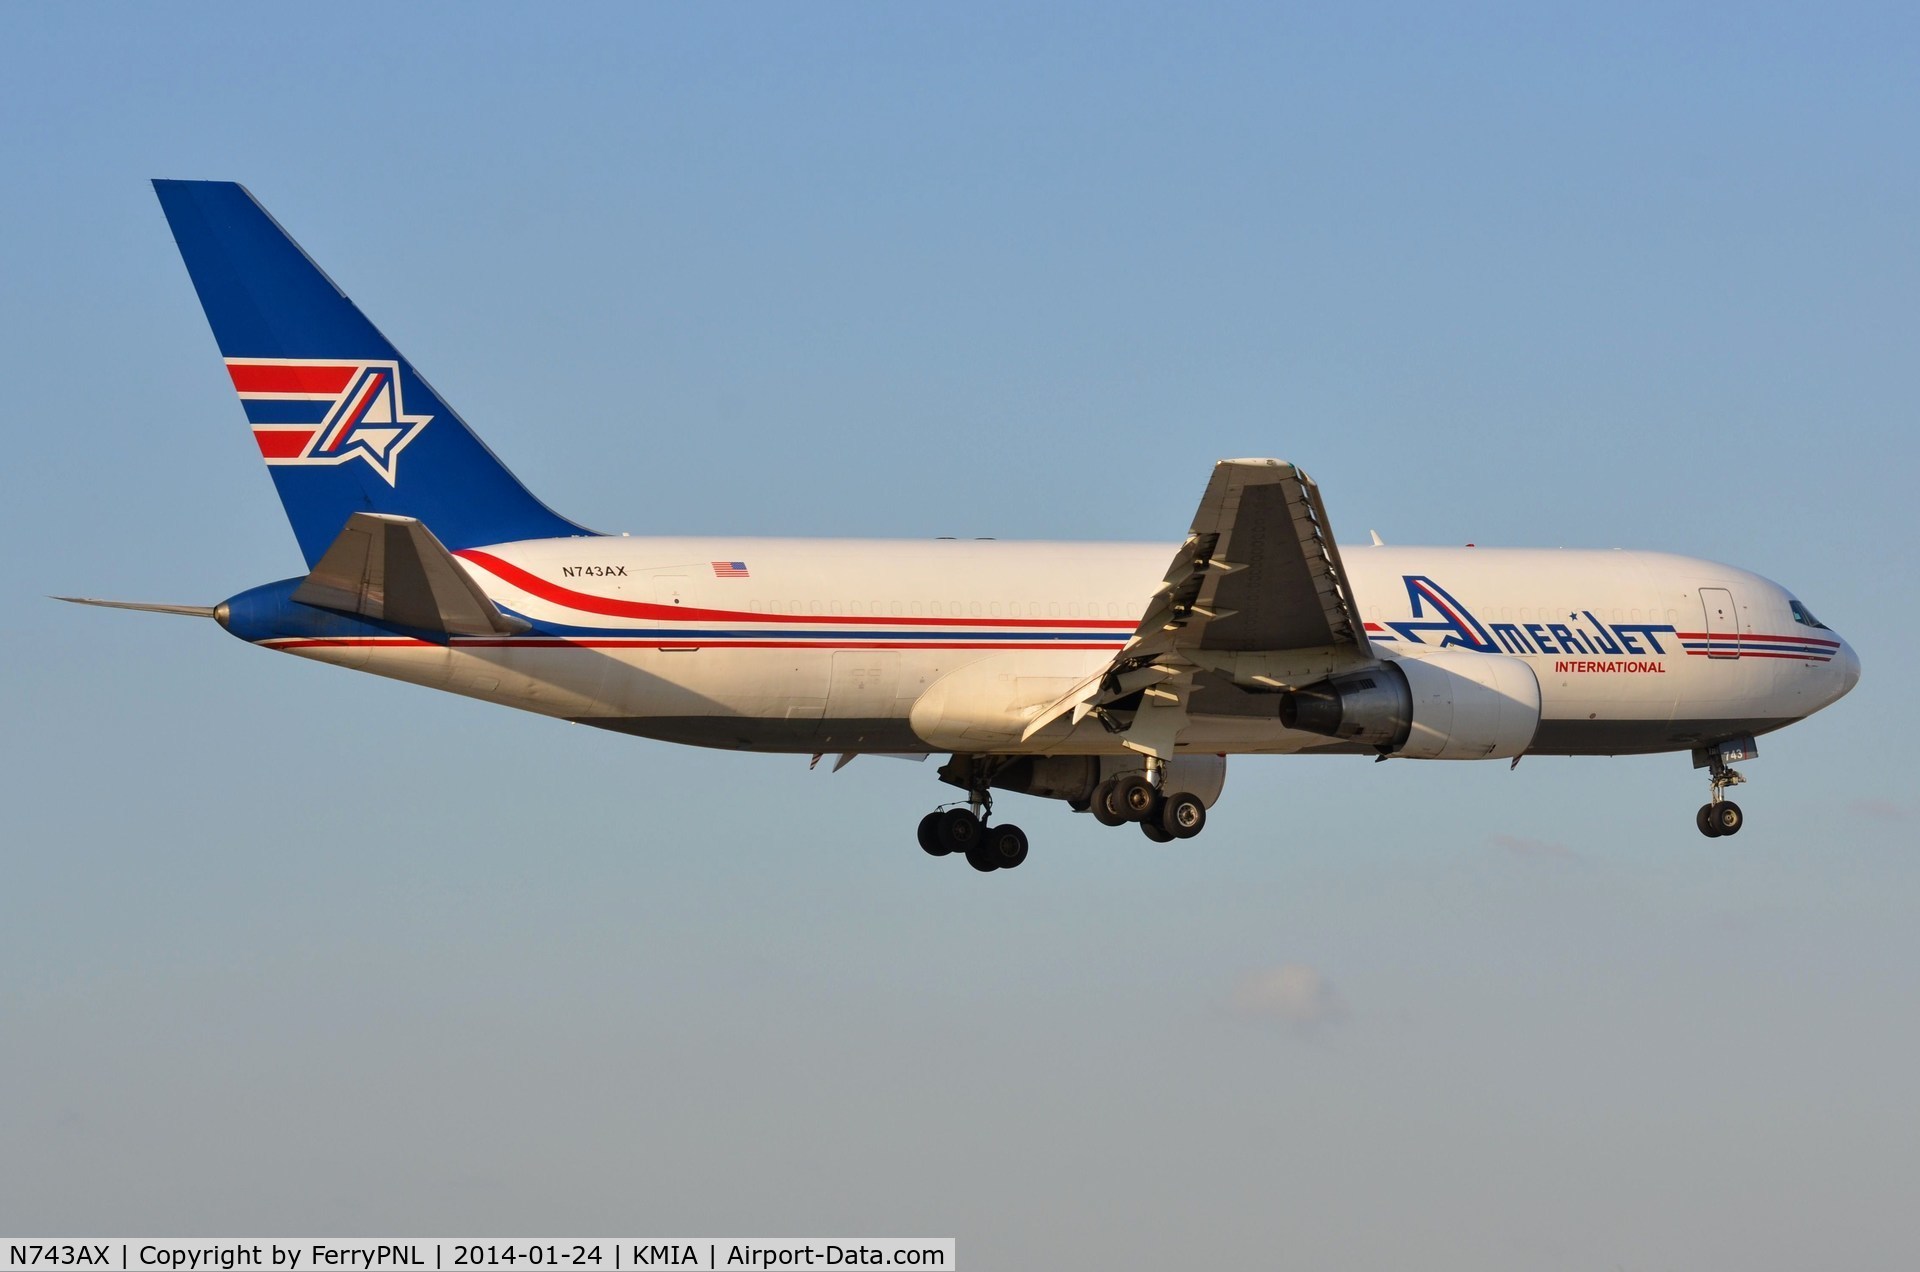 N743AX, 1982 Boeing 767-232 C/N 22218, Former DL and ABX B762  now operates as a freighter for Amerijet.